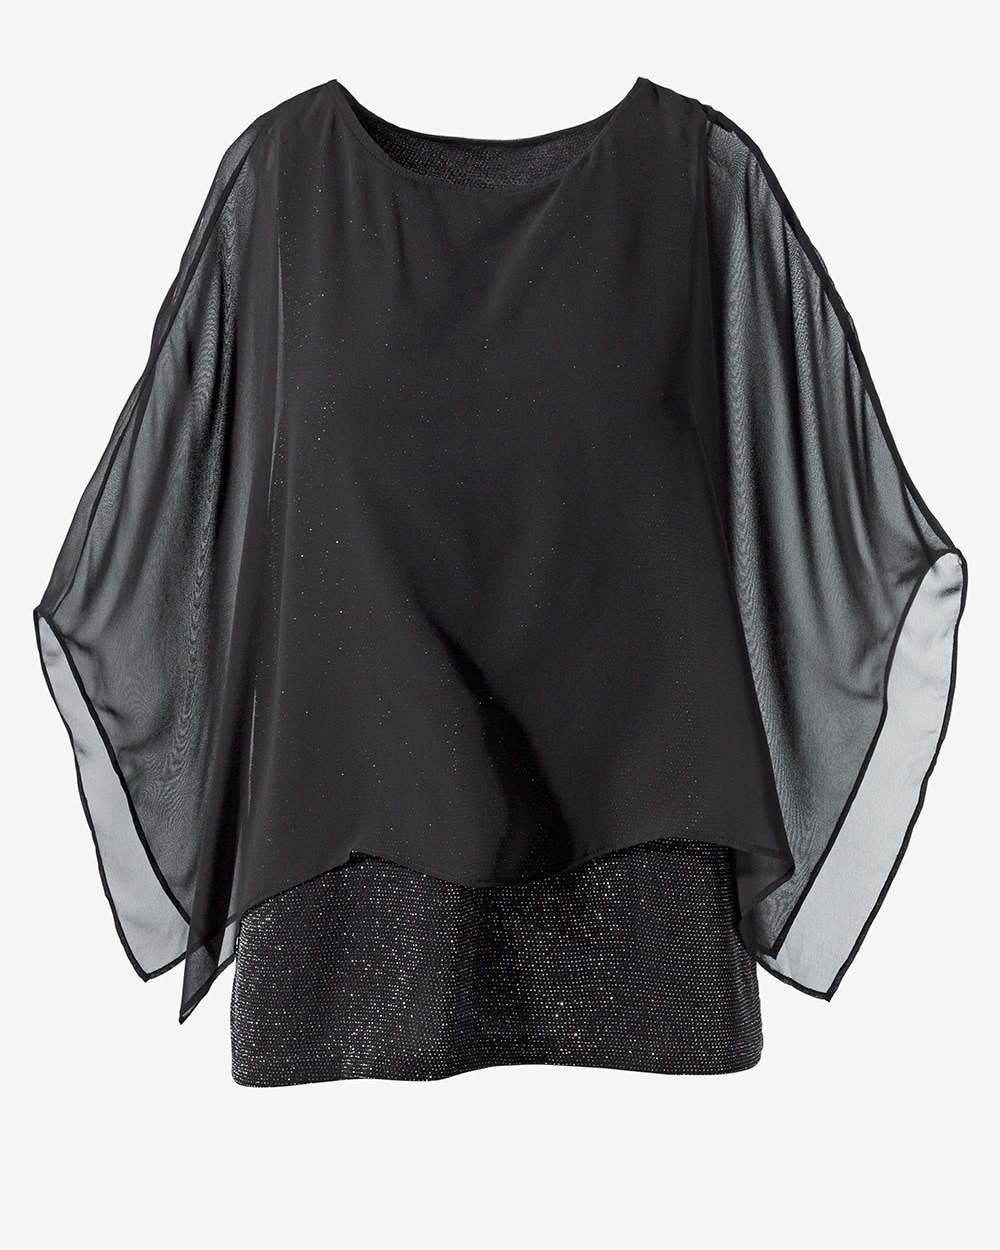 Easywear Shimmer Layered Top